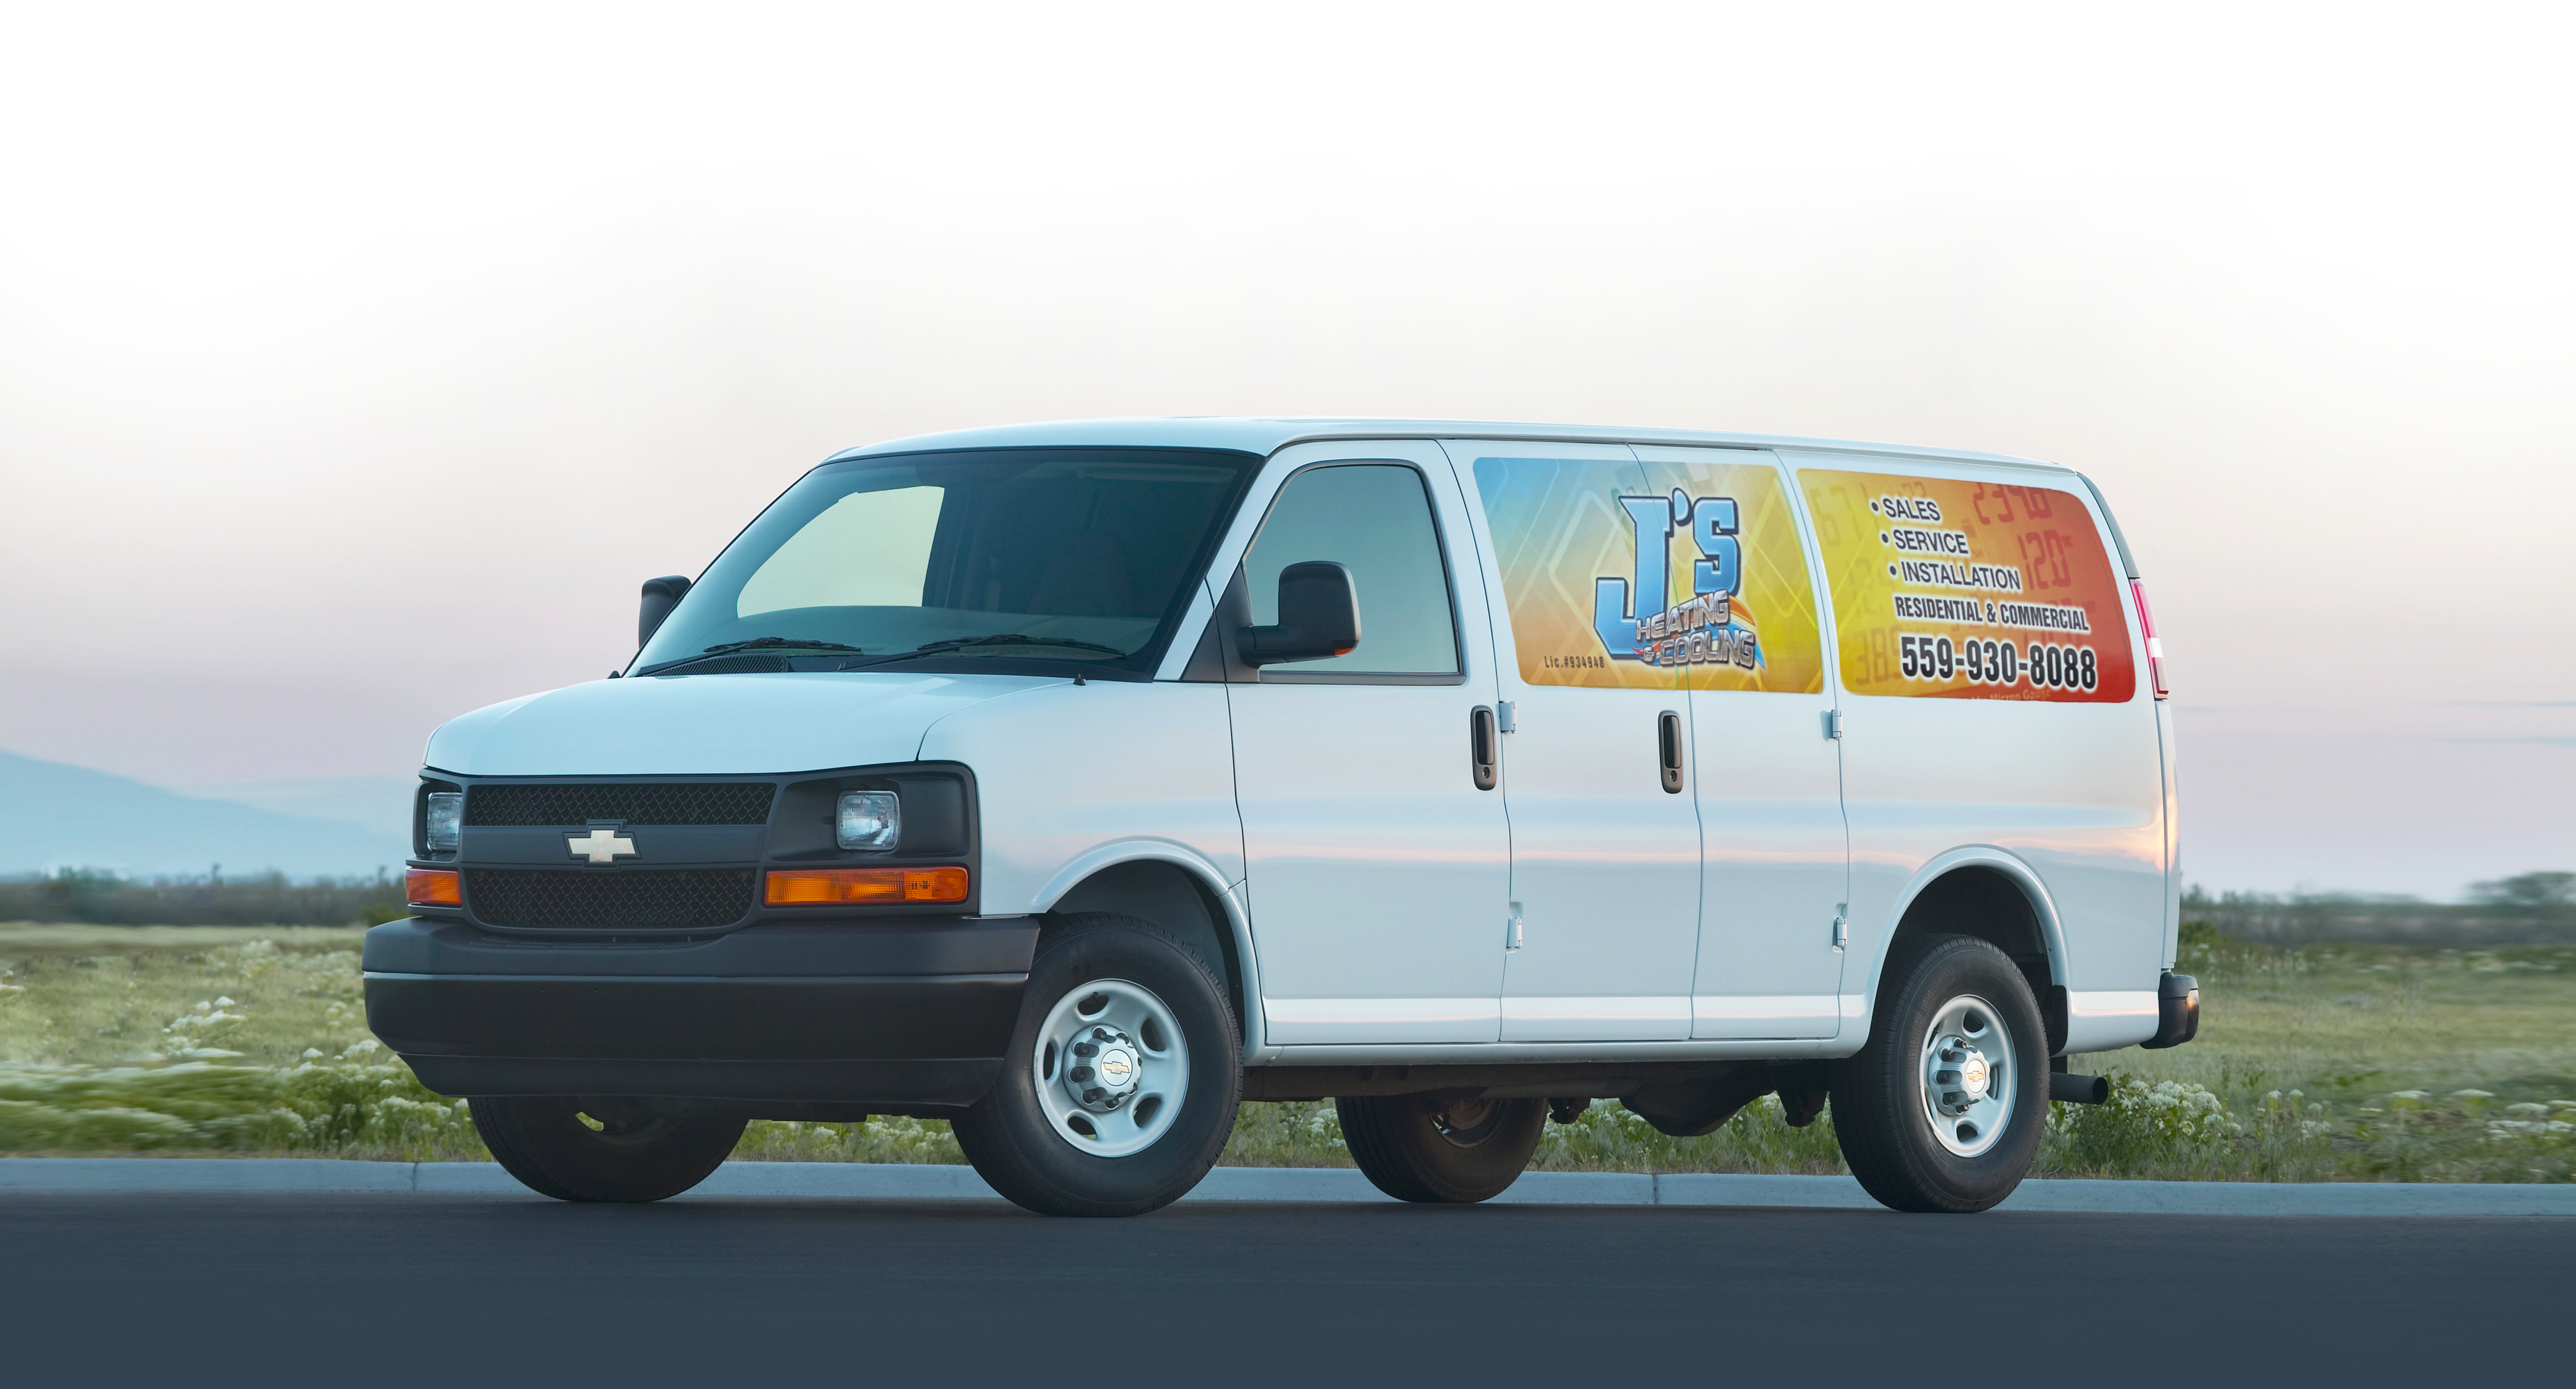 J's Heating and Cooling Van Fresno HVAC Specialists